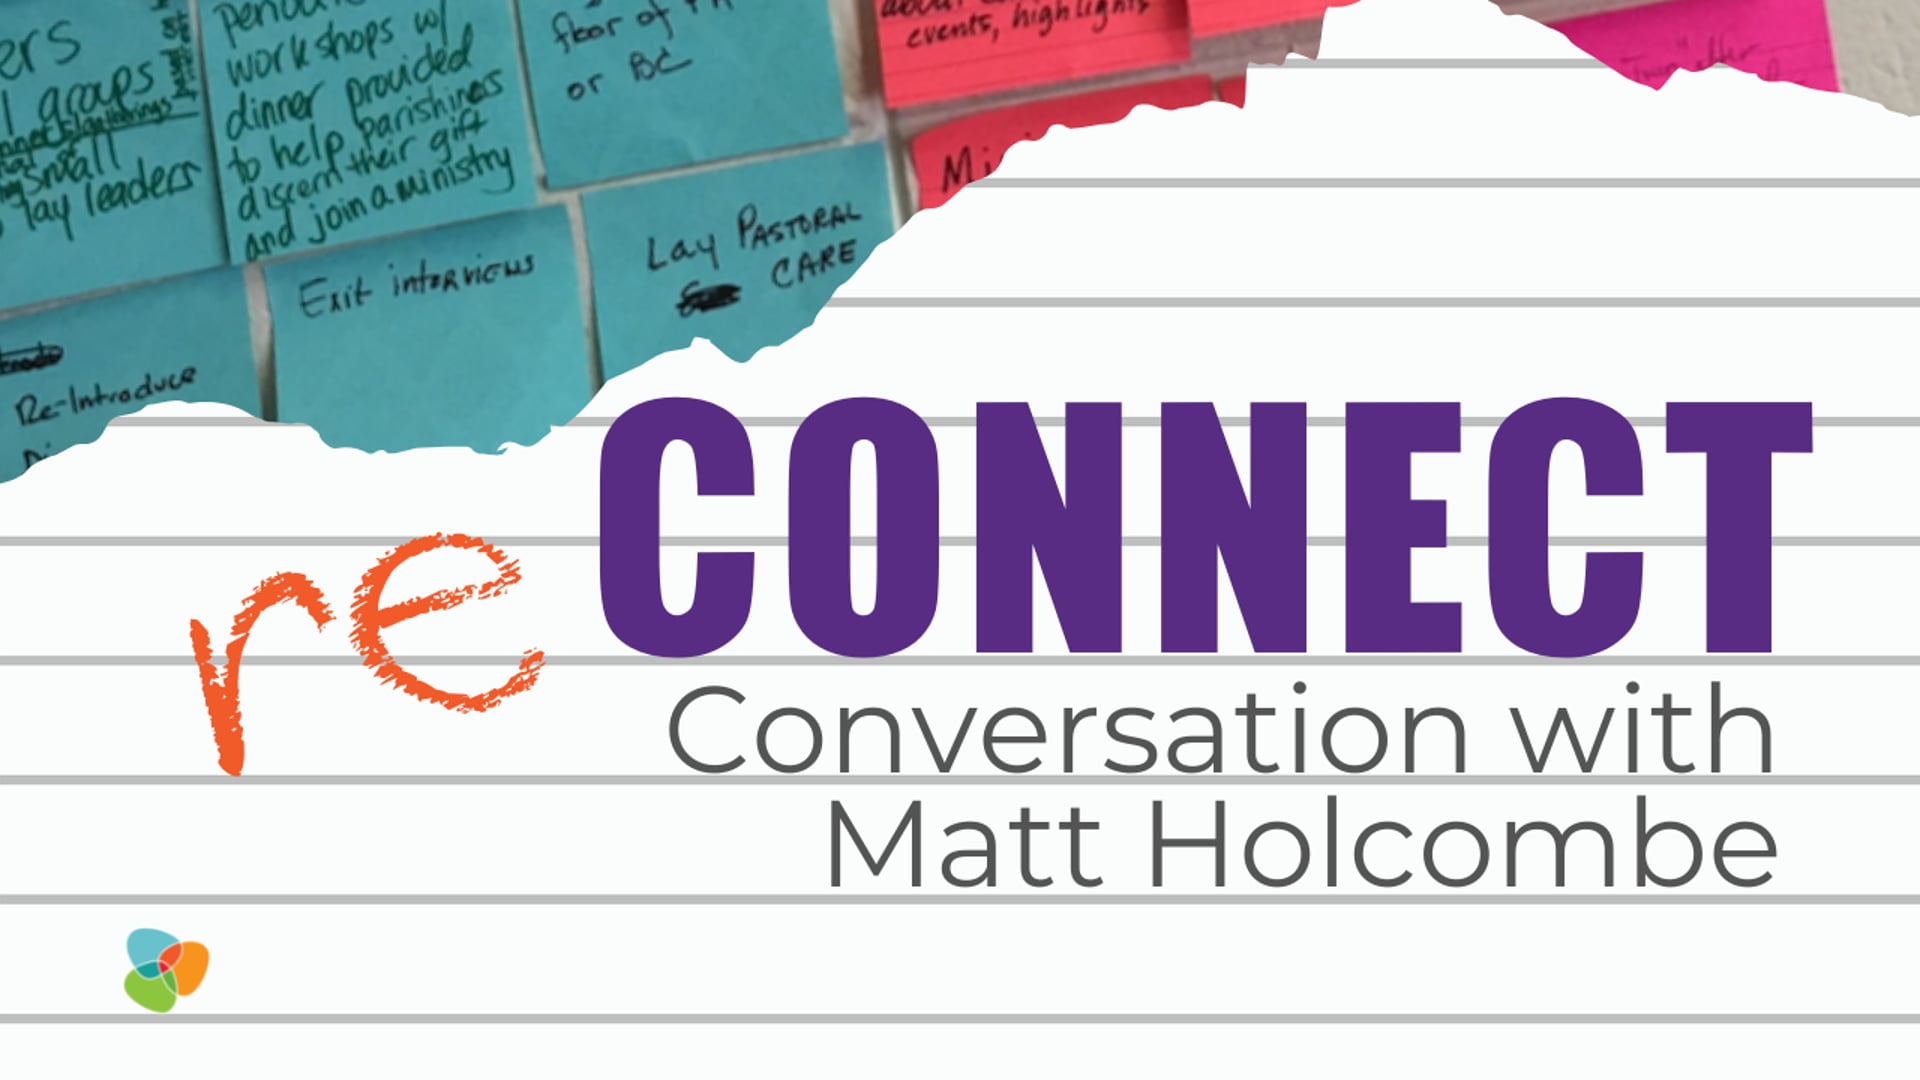 ReConnect Conversation with Matt Holcombe